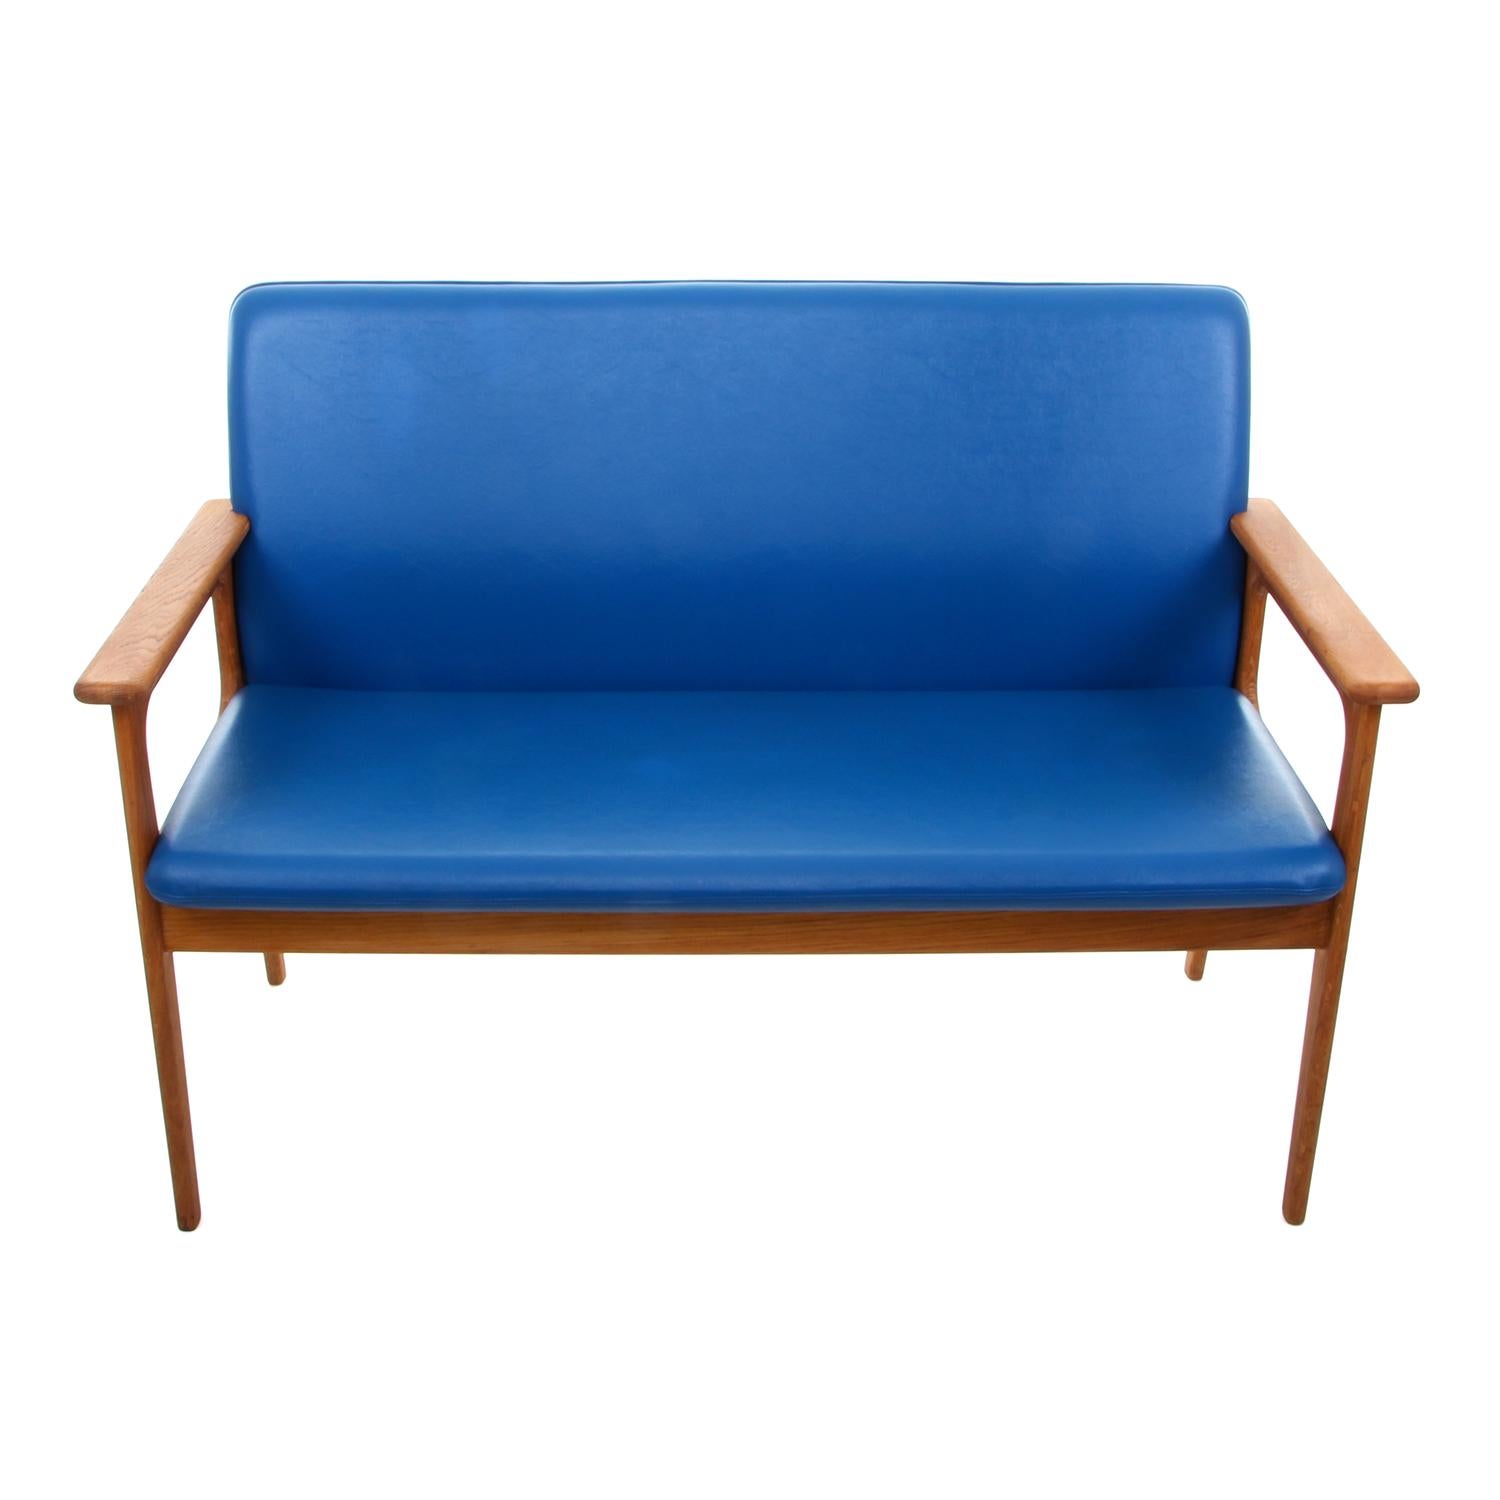 Two-Seat Sofa by Erik Buch 1970s Oil-Treated Oak Couch with Clear Blue Upholster (Skandinavische Moderne)